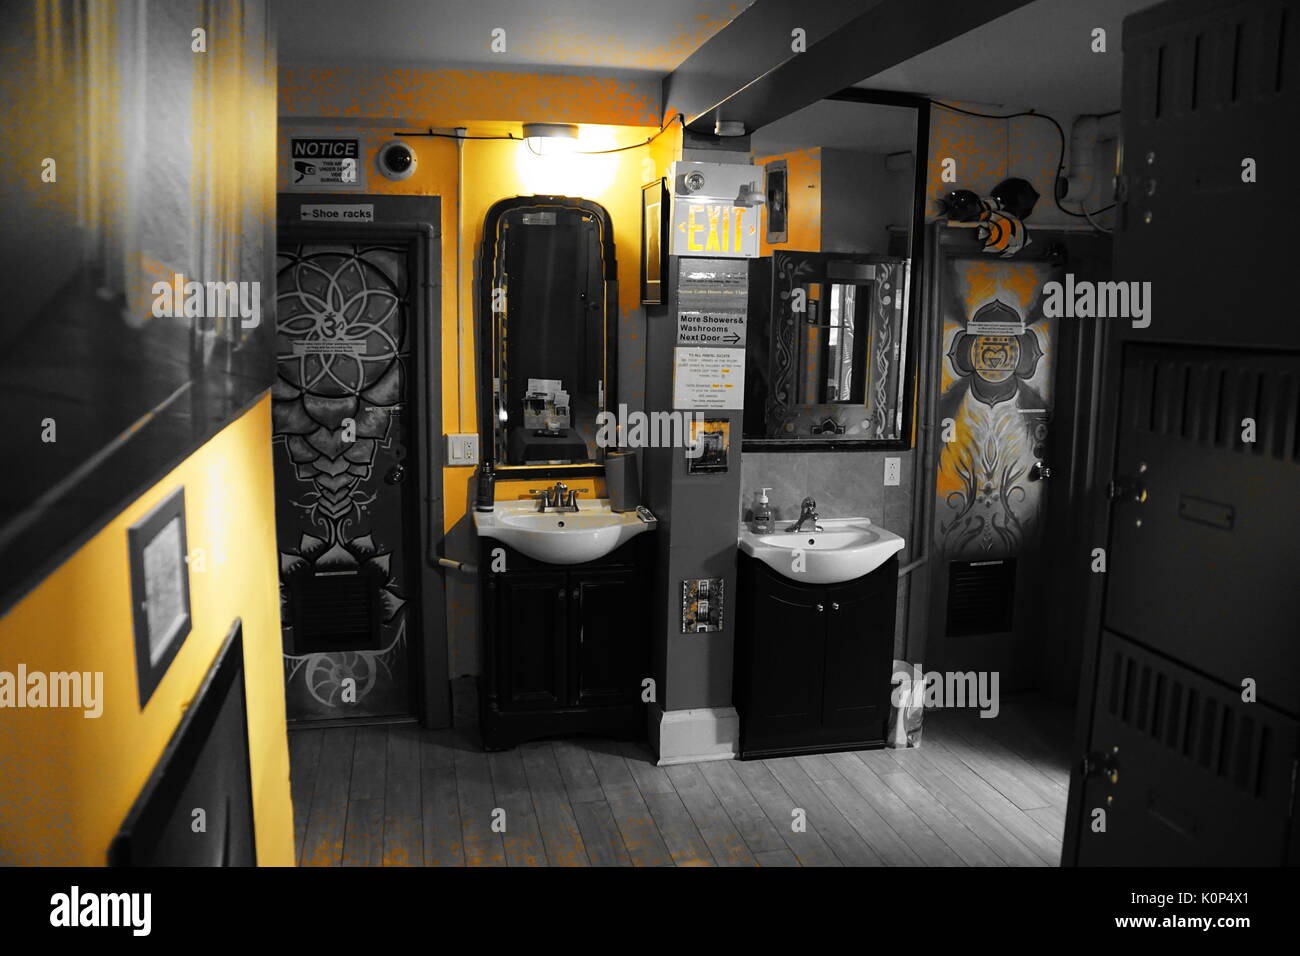 sinks, mirrors and murals in colour corrected yellow and grey bathroom/toilet Stock Photo